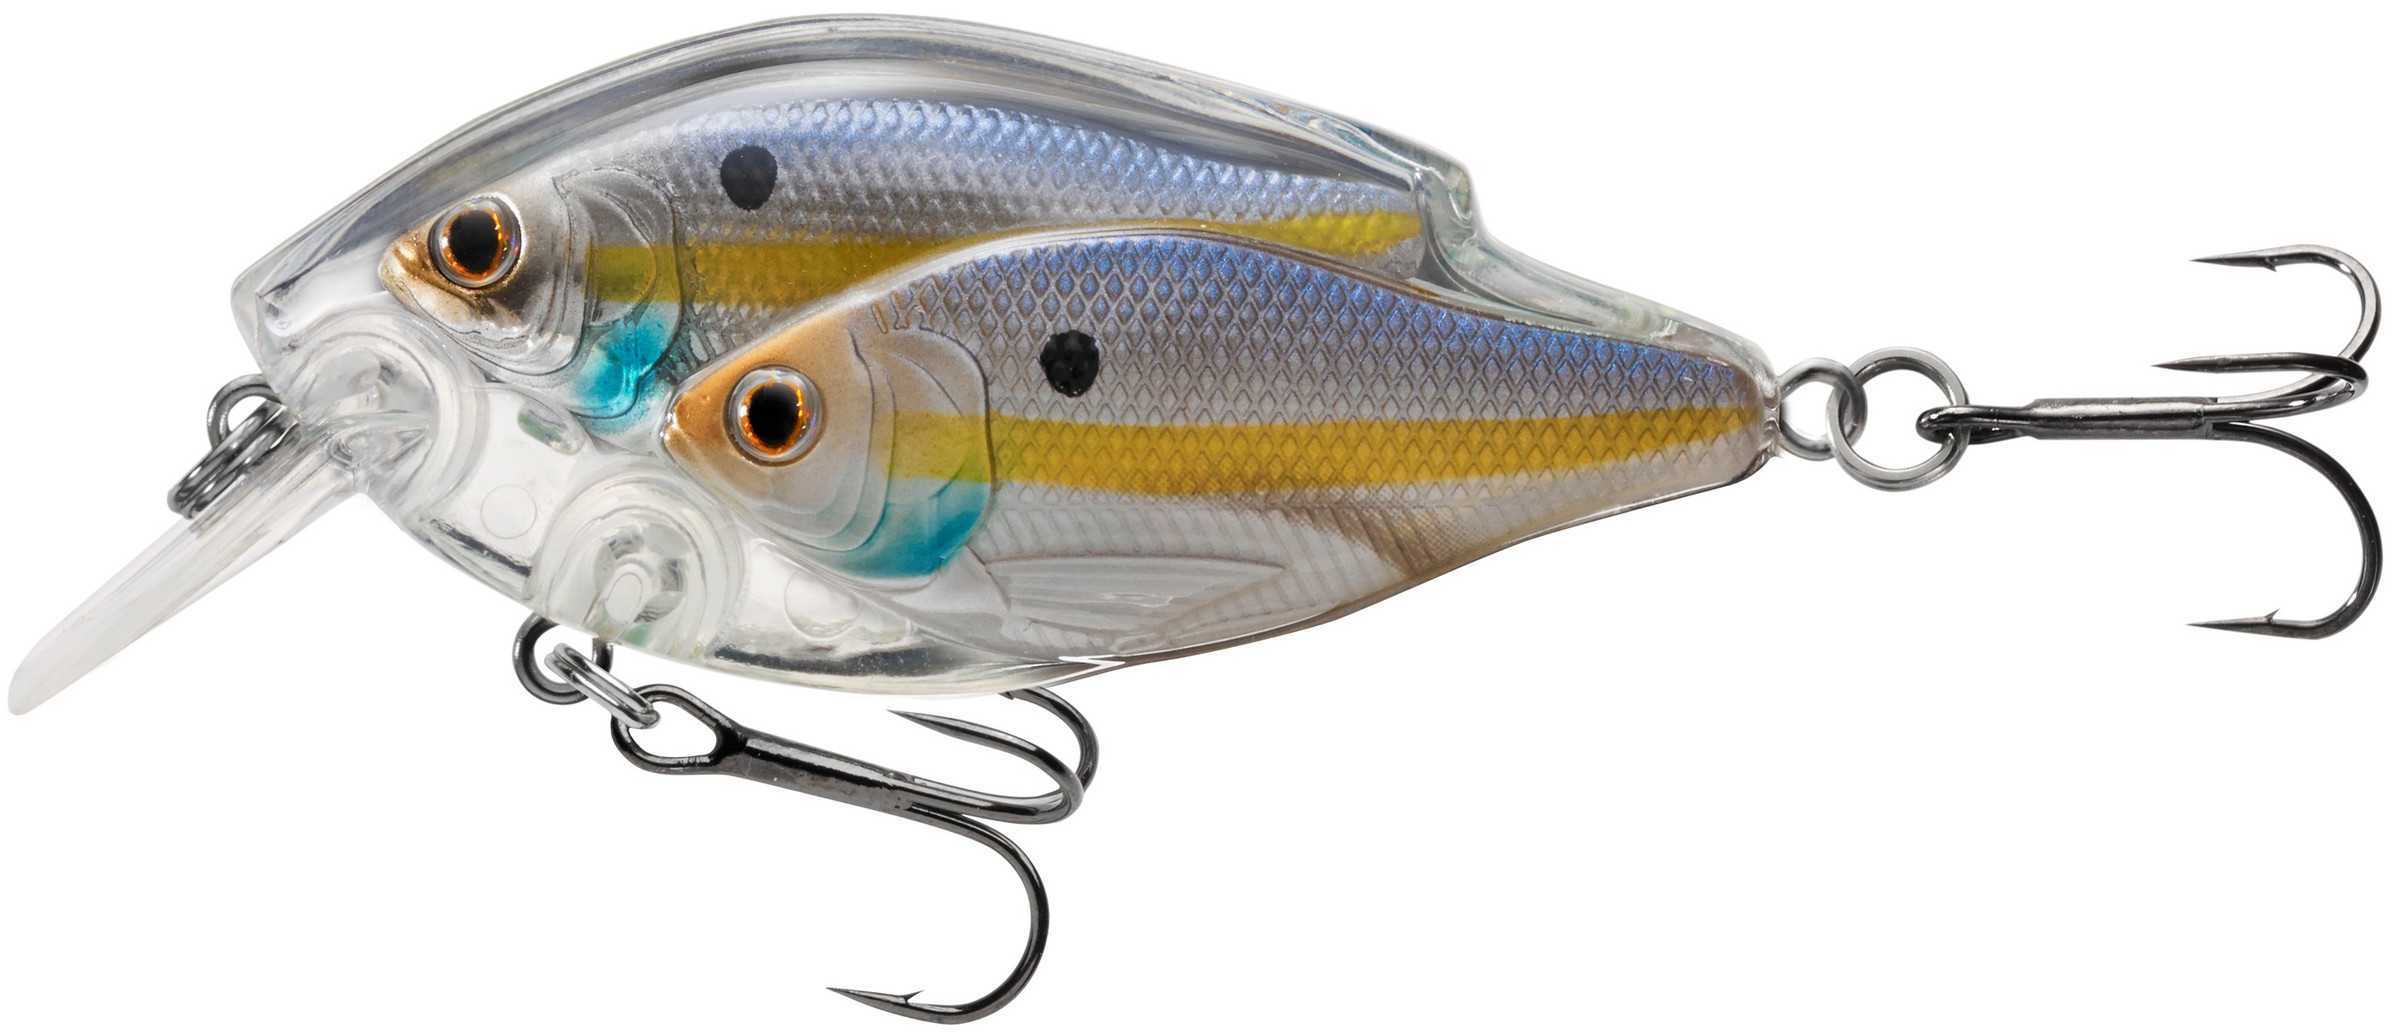 LIVETARGET Lures / Koppers Fishing and Tackle Corp Threadfin Shad Juvenile Bait Ball Squarebill Pearl/Violet #6 Shallow Dive Md: TSB60S812